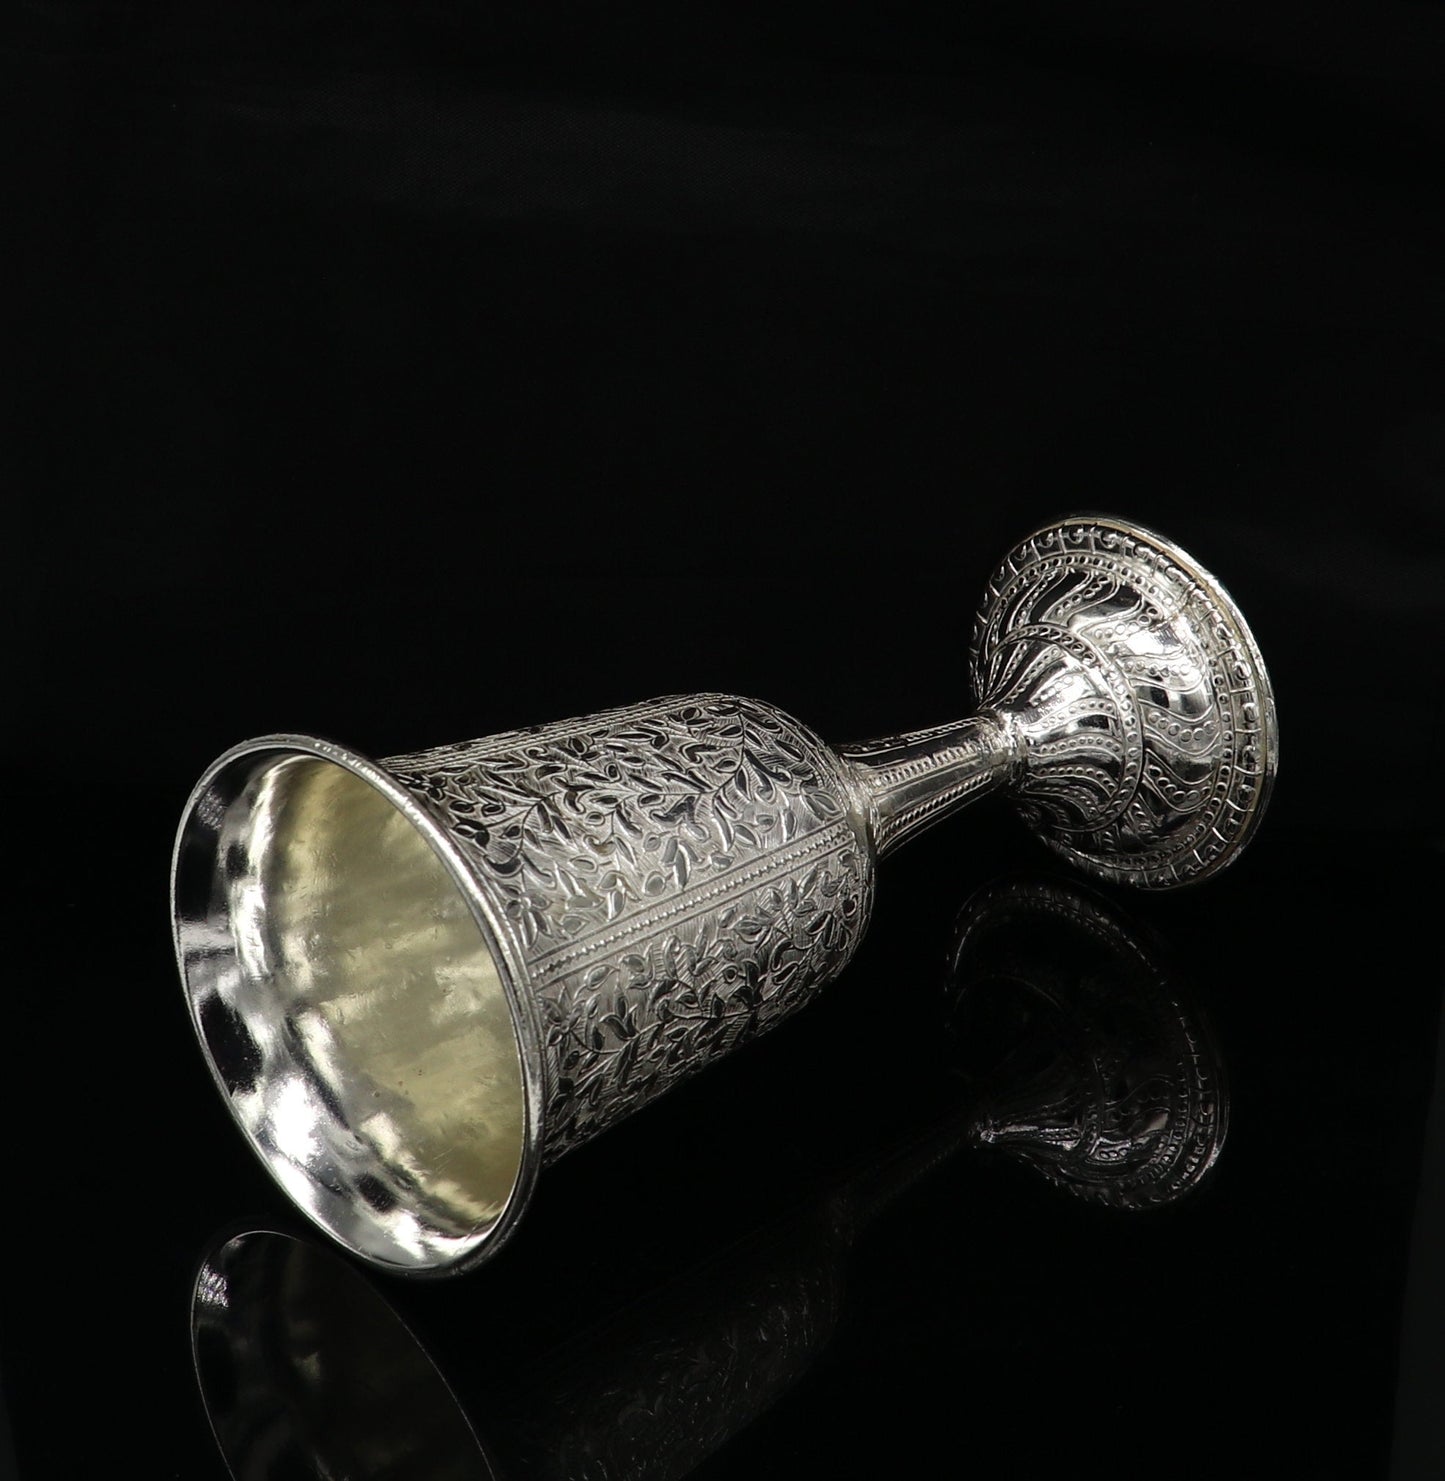 925 fine silver handmade vessel, water/milk wine Glass tumbler, silver flask, silver utensils or articles stay healthy from bacteria sv35 - TRIBAL ORNAMENTS